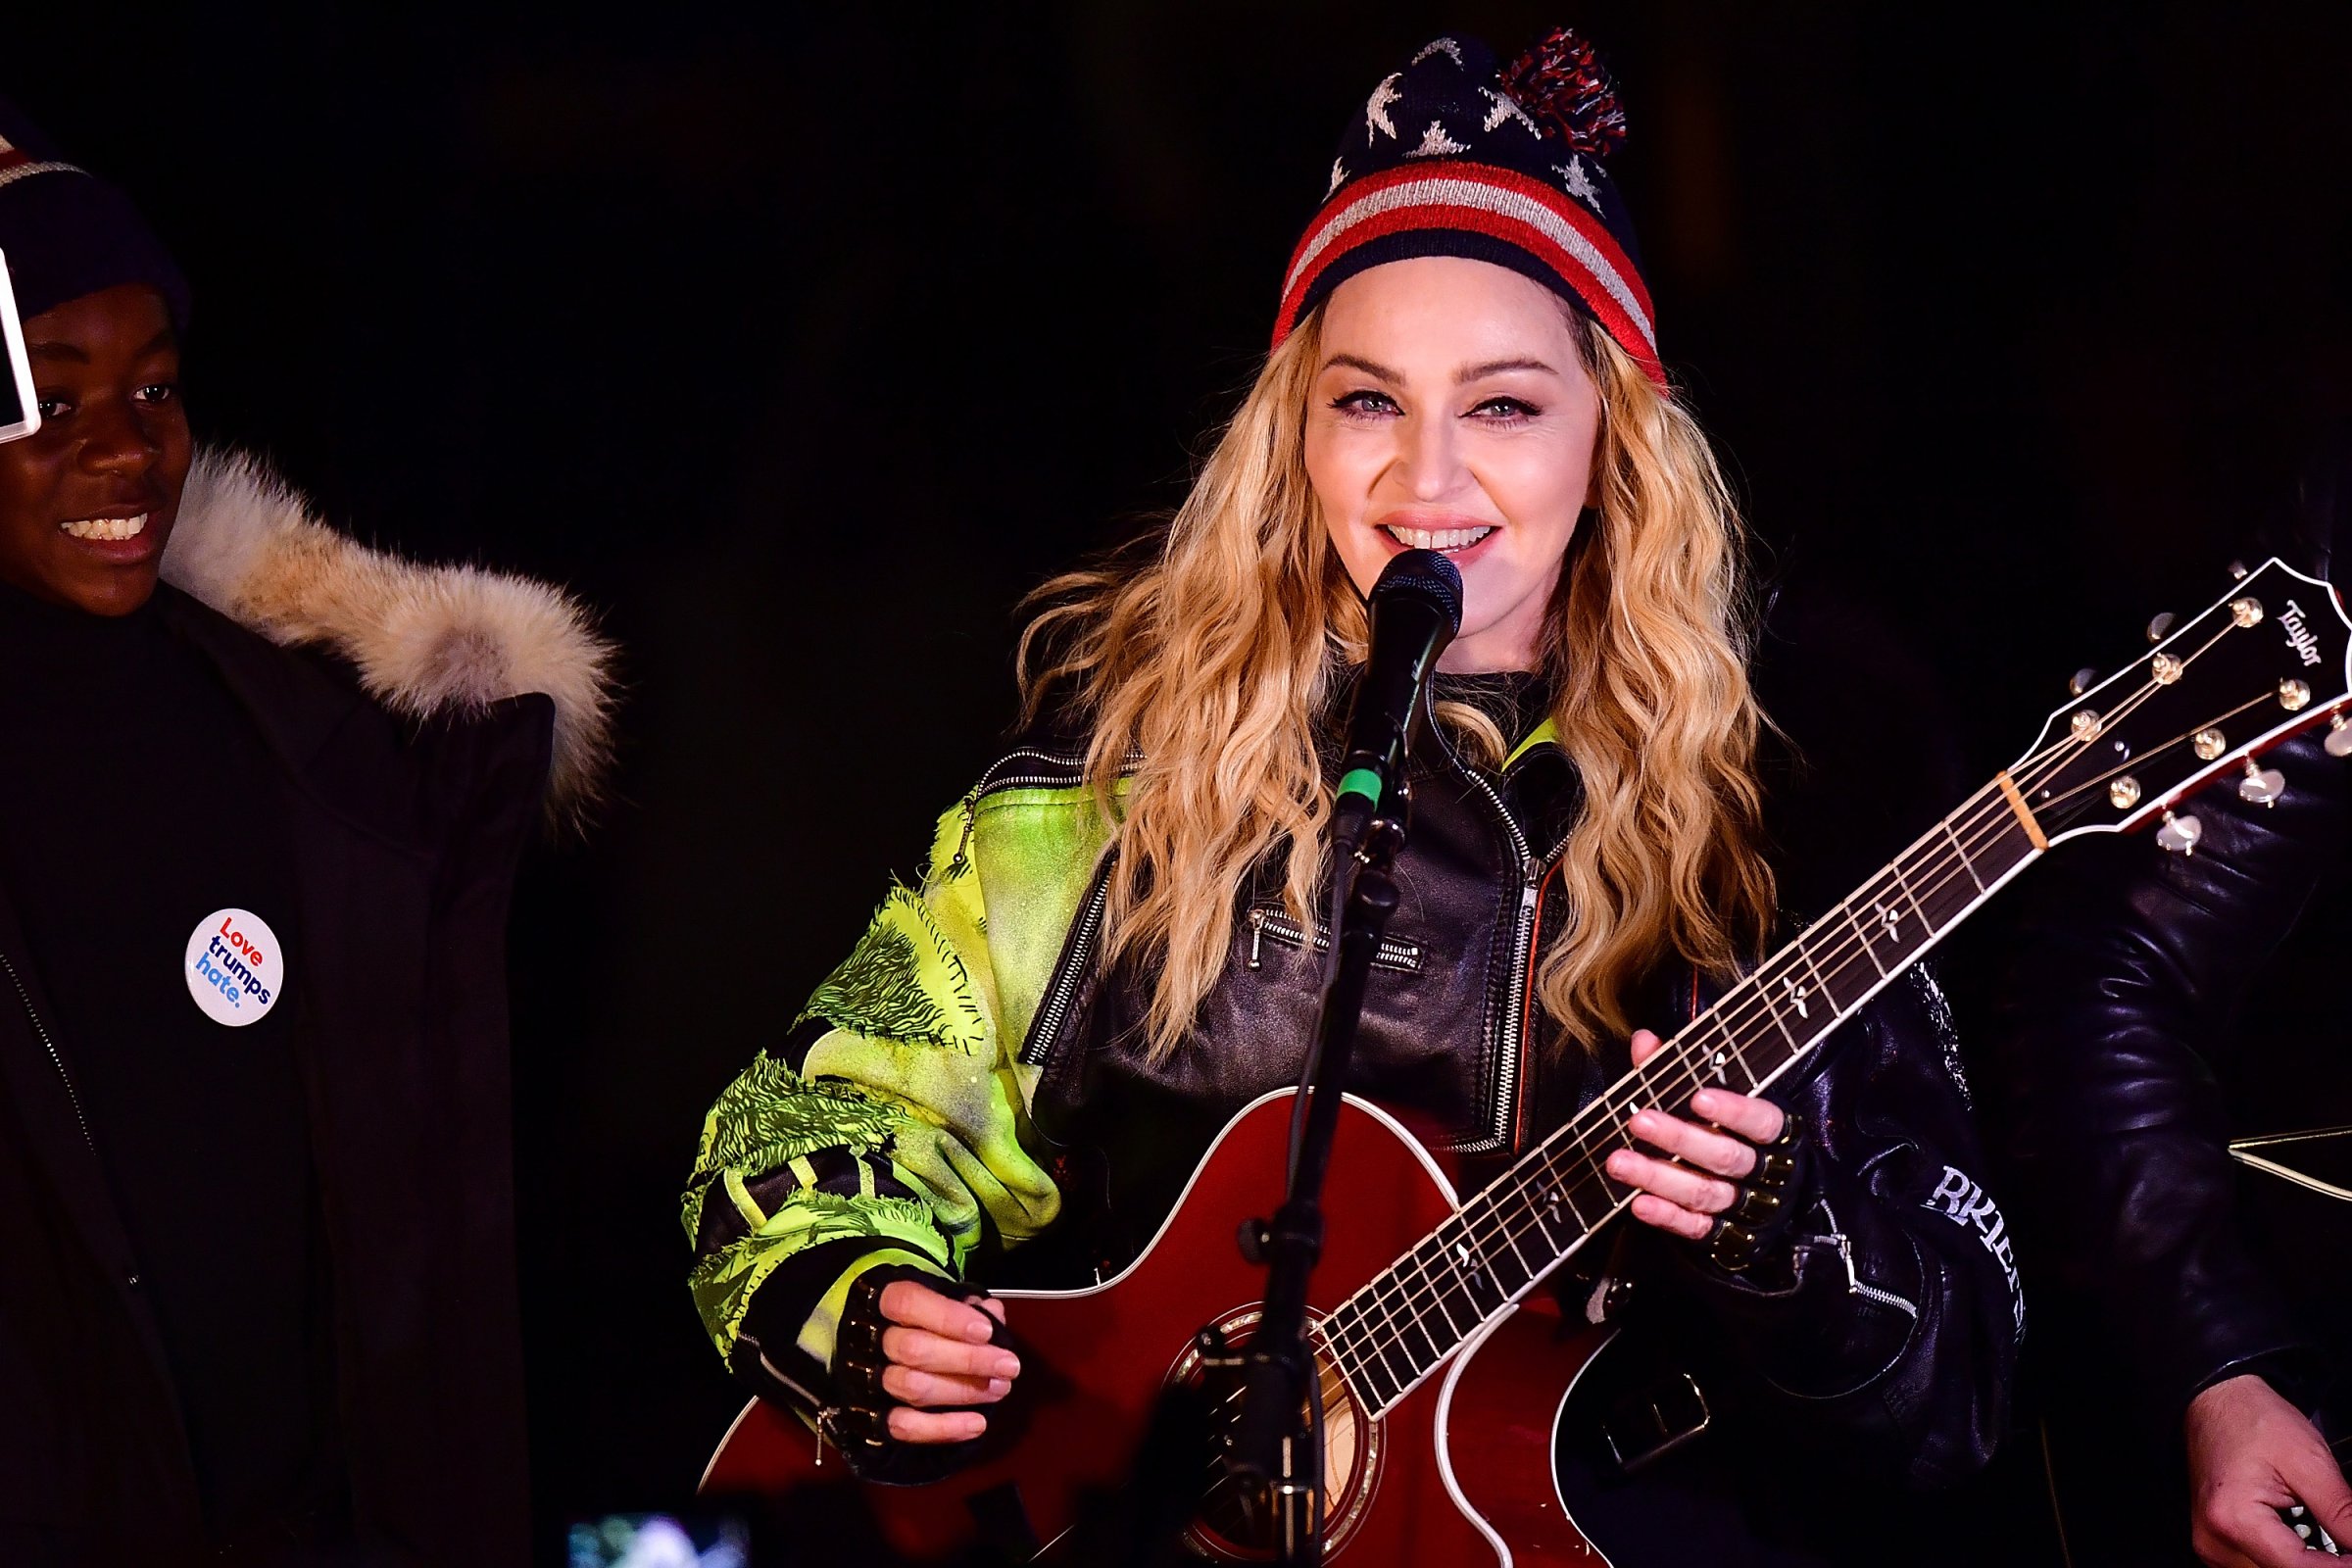 Madonna perfroms a surprise concert at Washington Square Park in support of Hillary Clinton on November 7, 2016 in New York City.